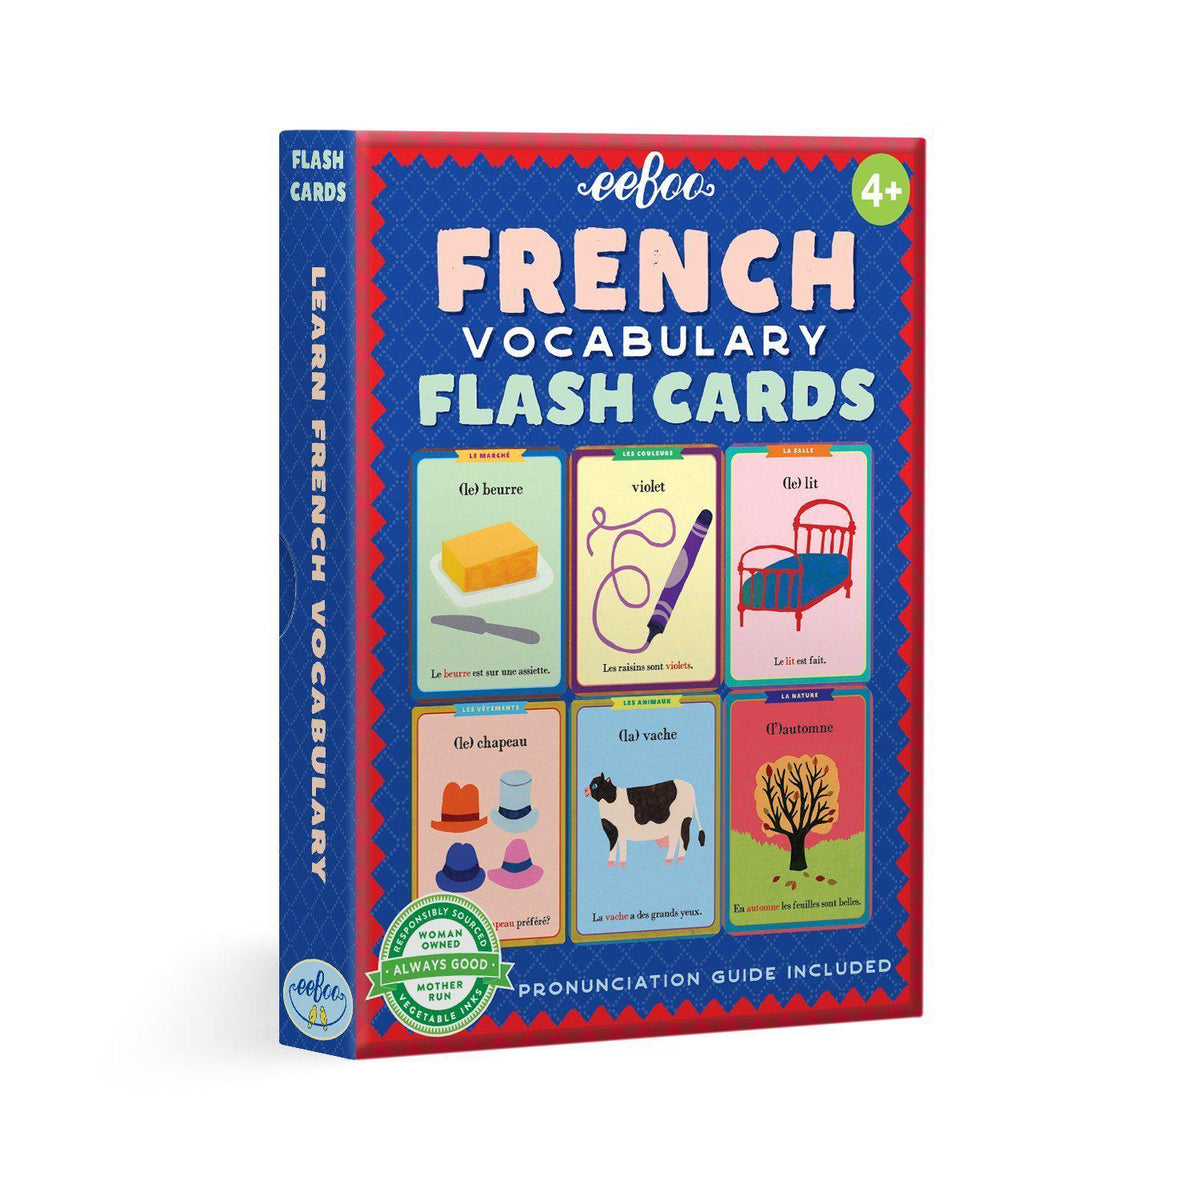 Package of French flash cards. 